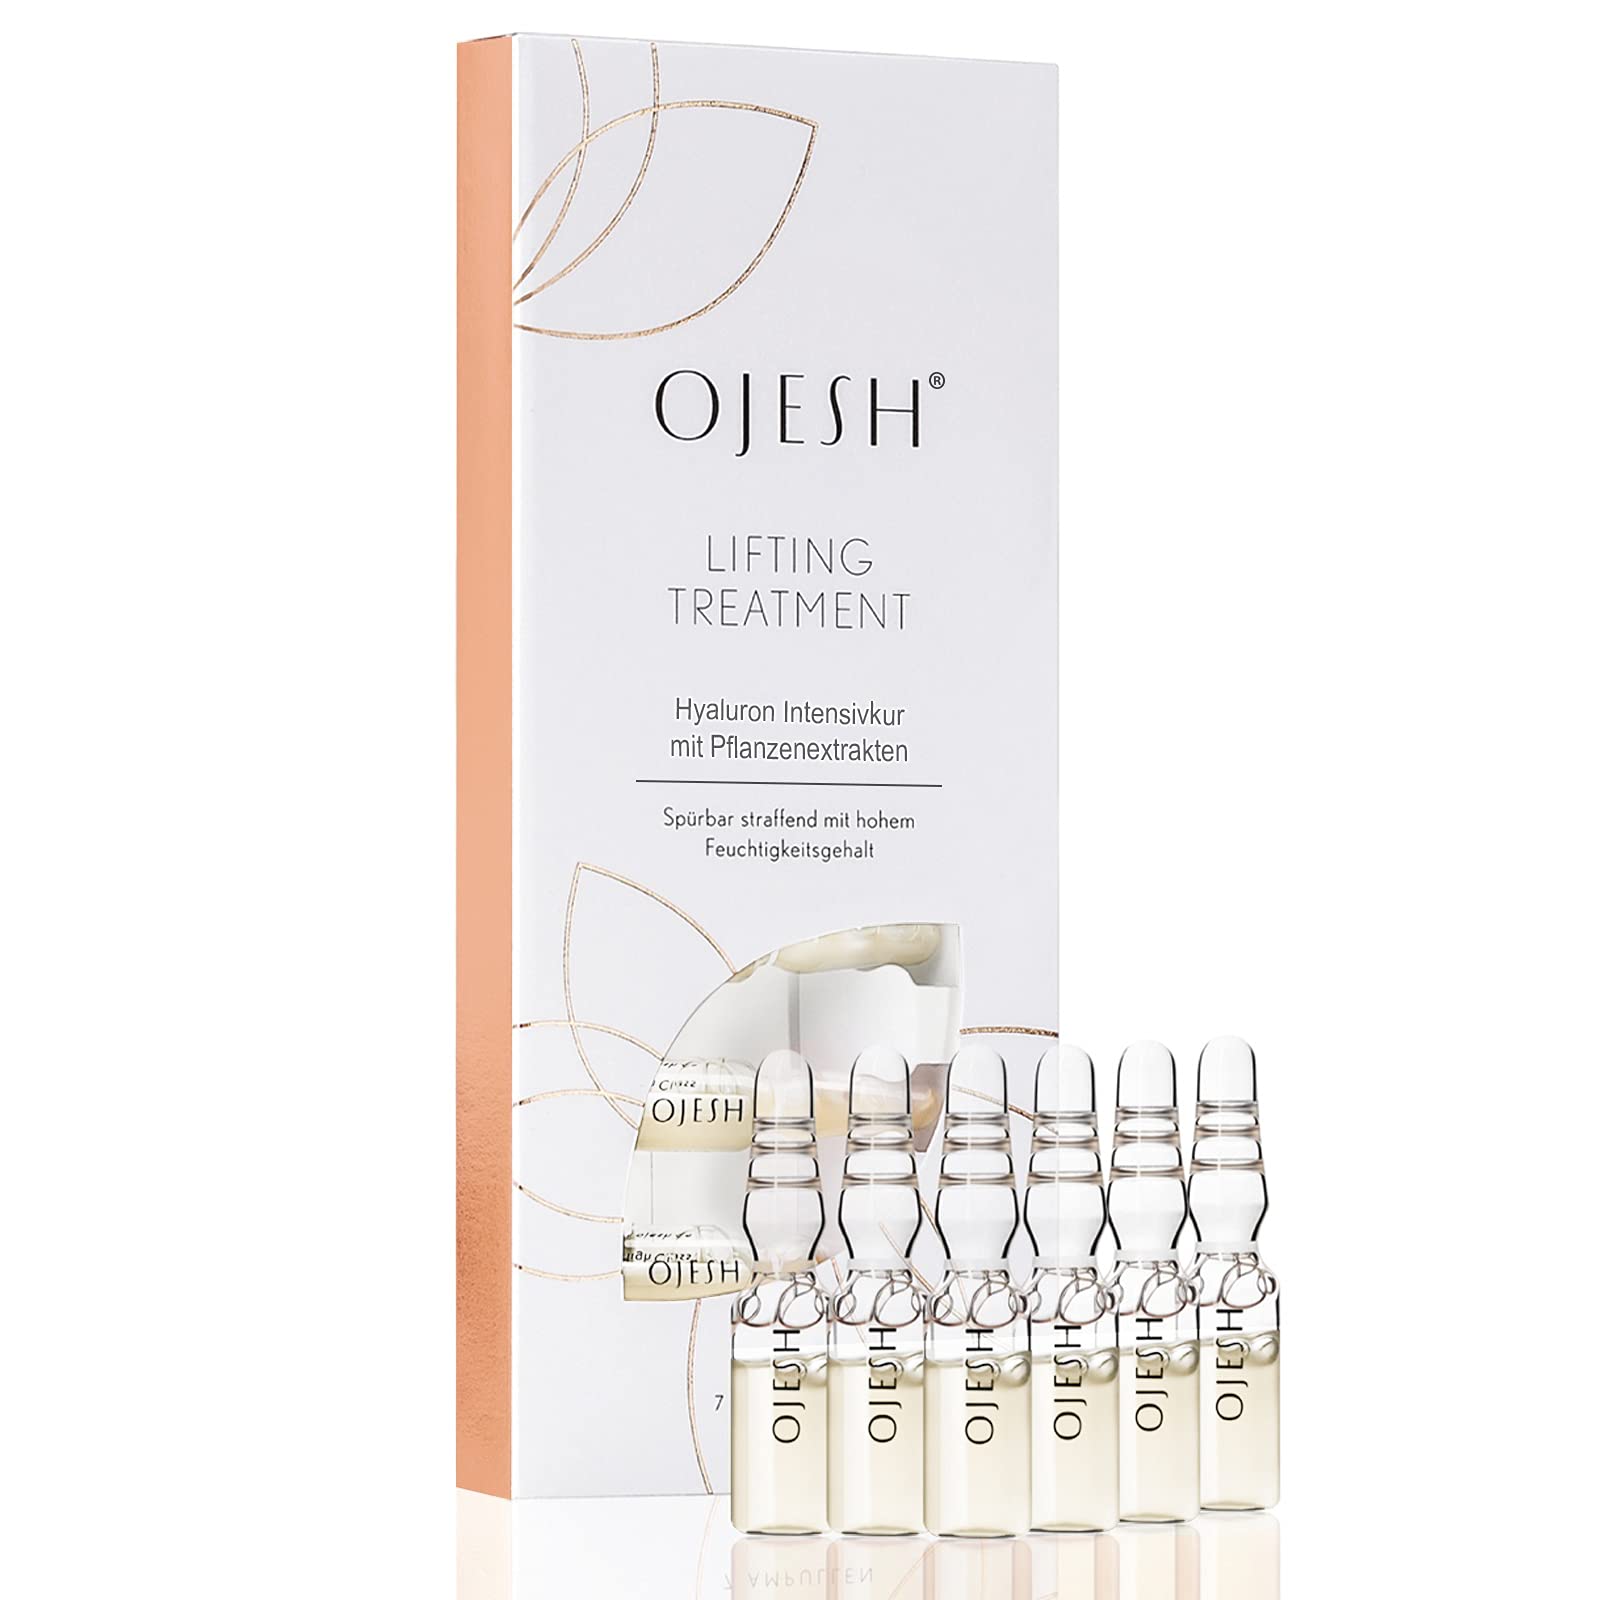 OJESH Anti-Wrinkle Serum Hydrating Hyaluronic Acid for Face, Anti-Aging, Repairing, Replumping, 0.8% concentration Intensive Care Lifting Treatment...